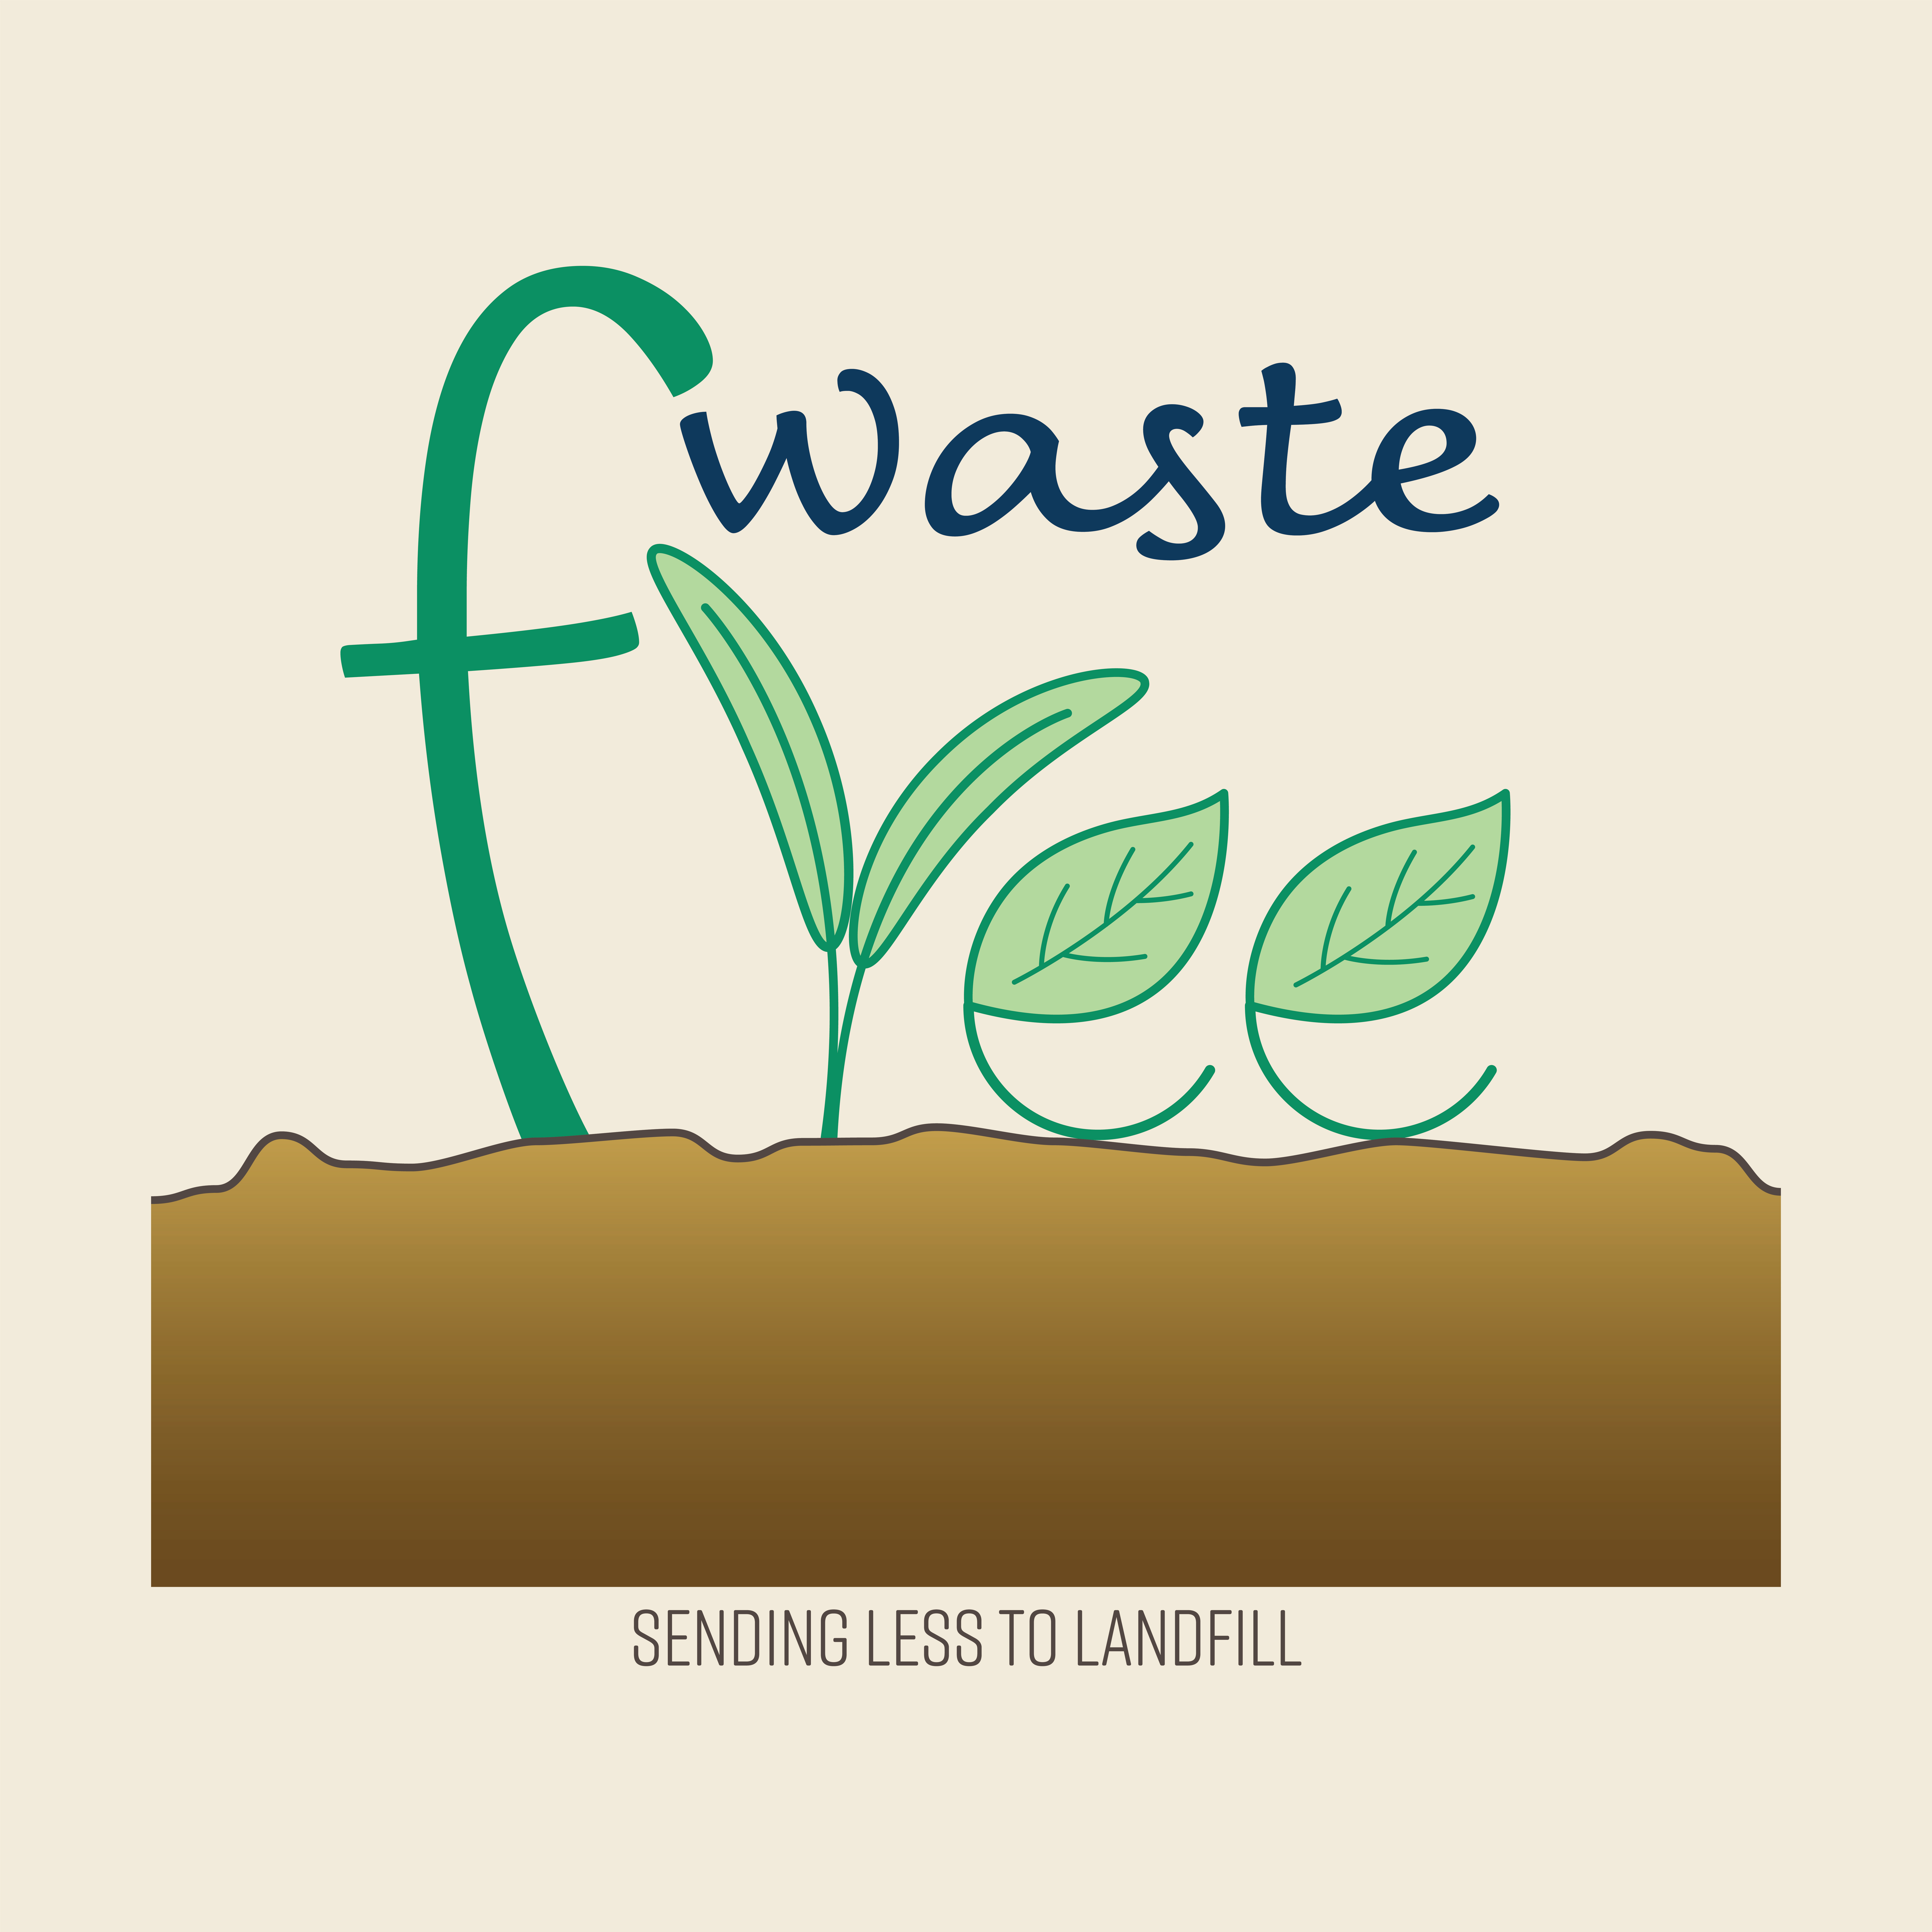 The Link between Resource Use and Waste Management